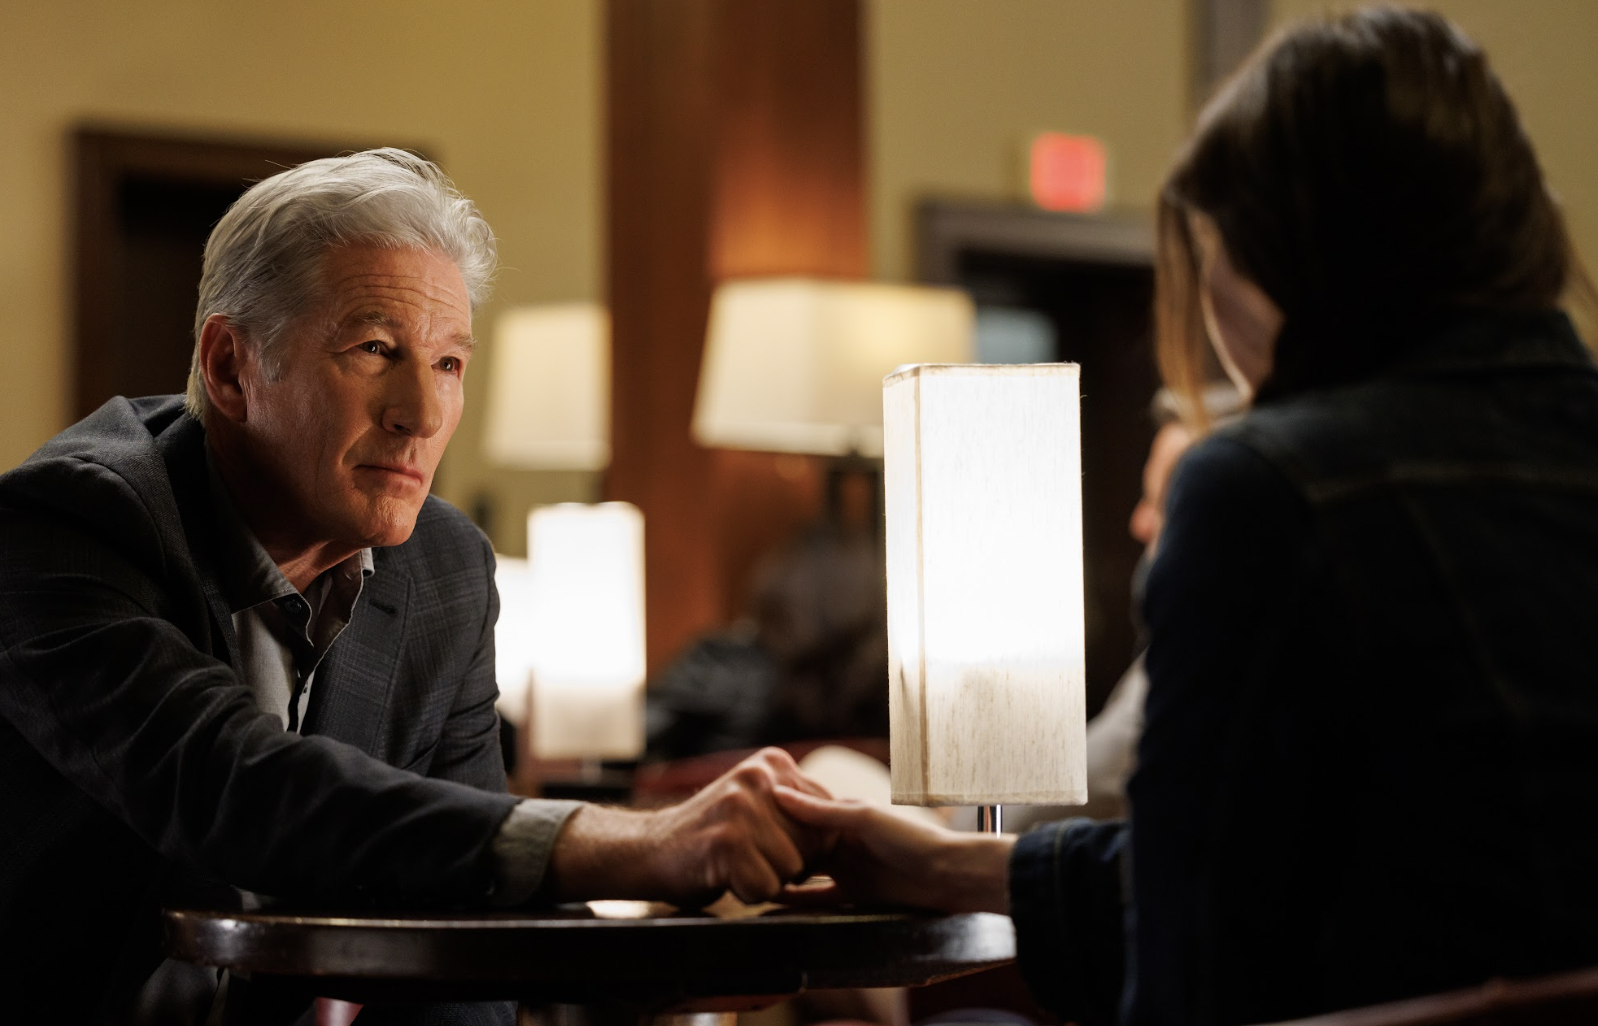 ‘Longing’ Trailer: Richard Gere Realizes He’s a Father After Learning a Shocking Secret